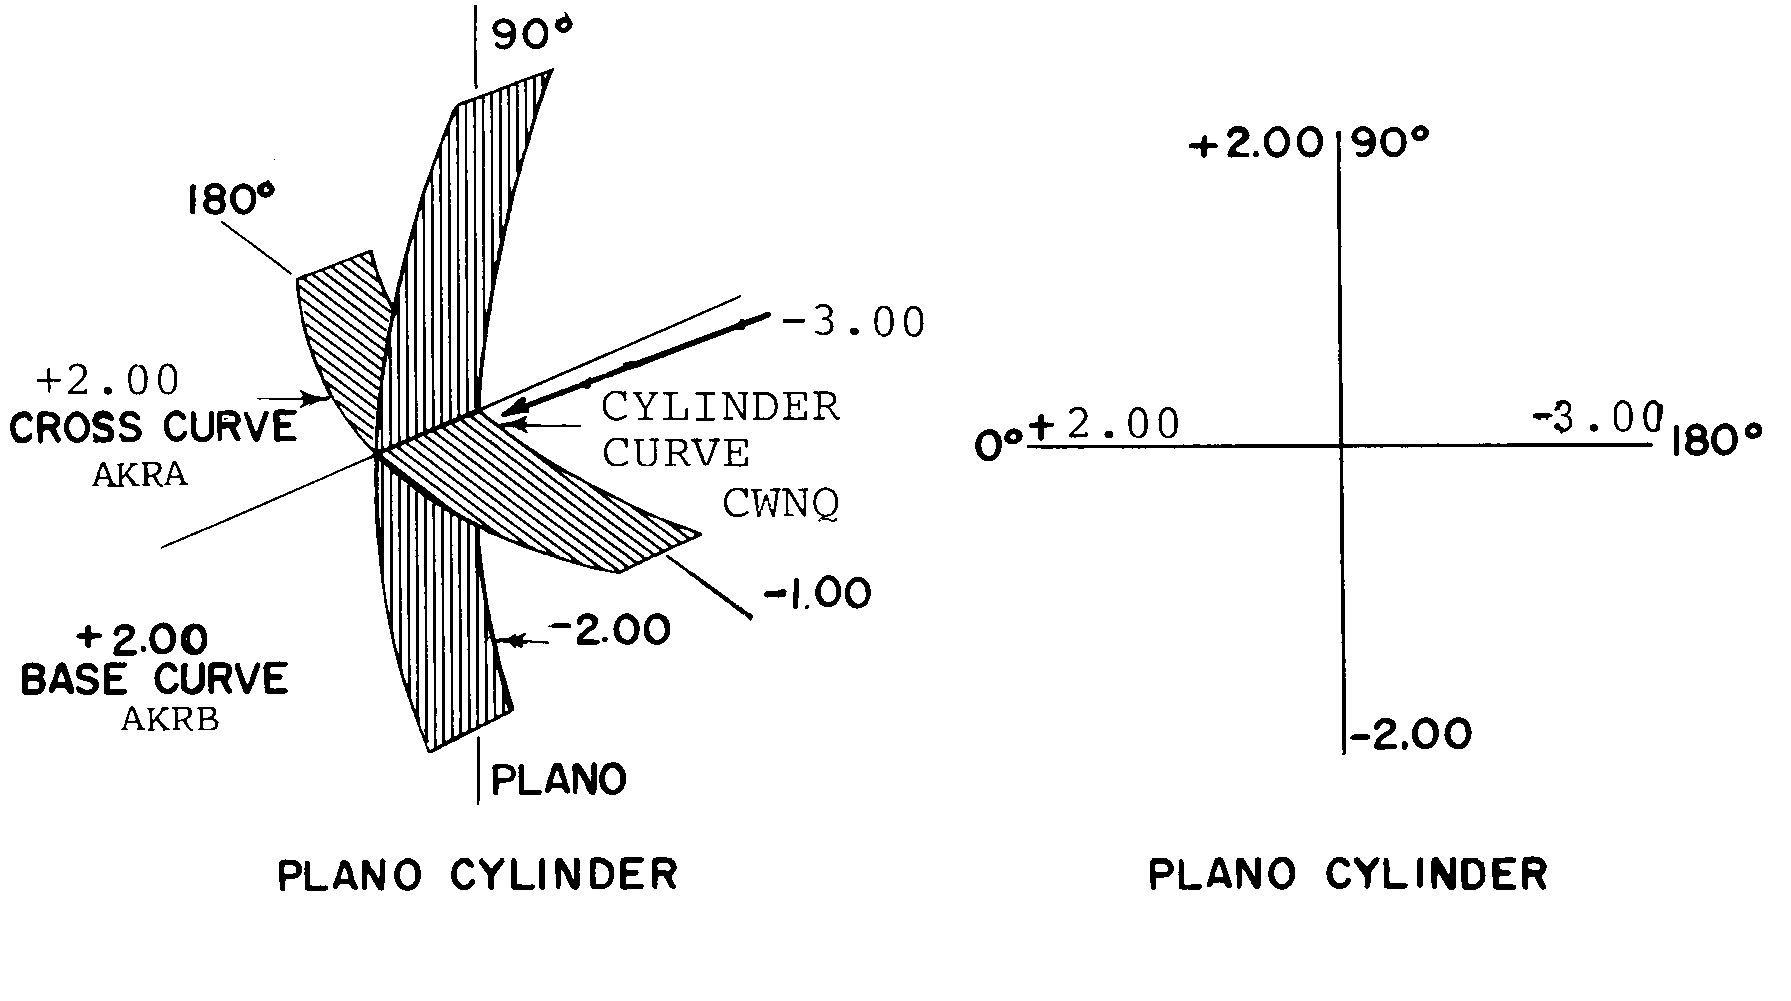 PLANO CYLINDER style nsn 6540-01-102-4295